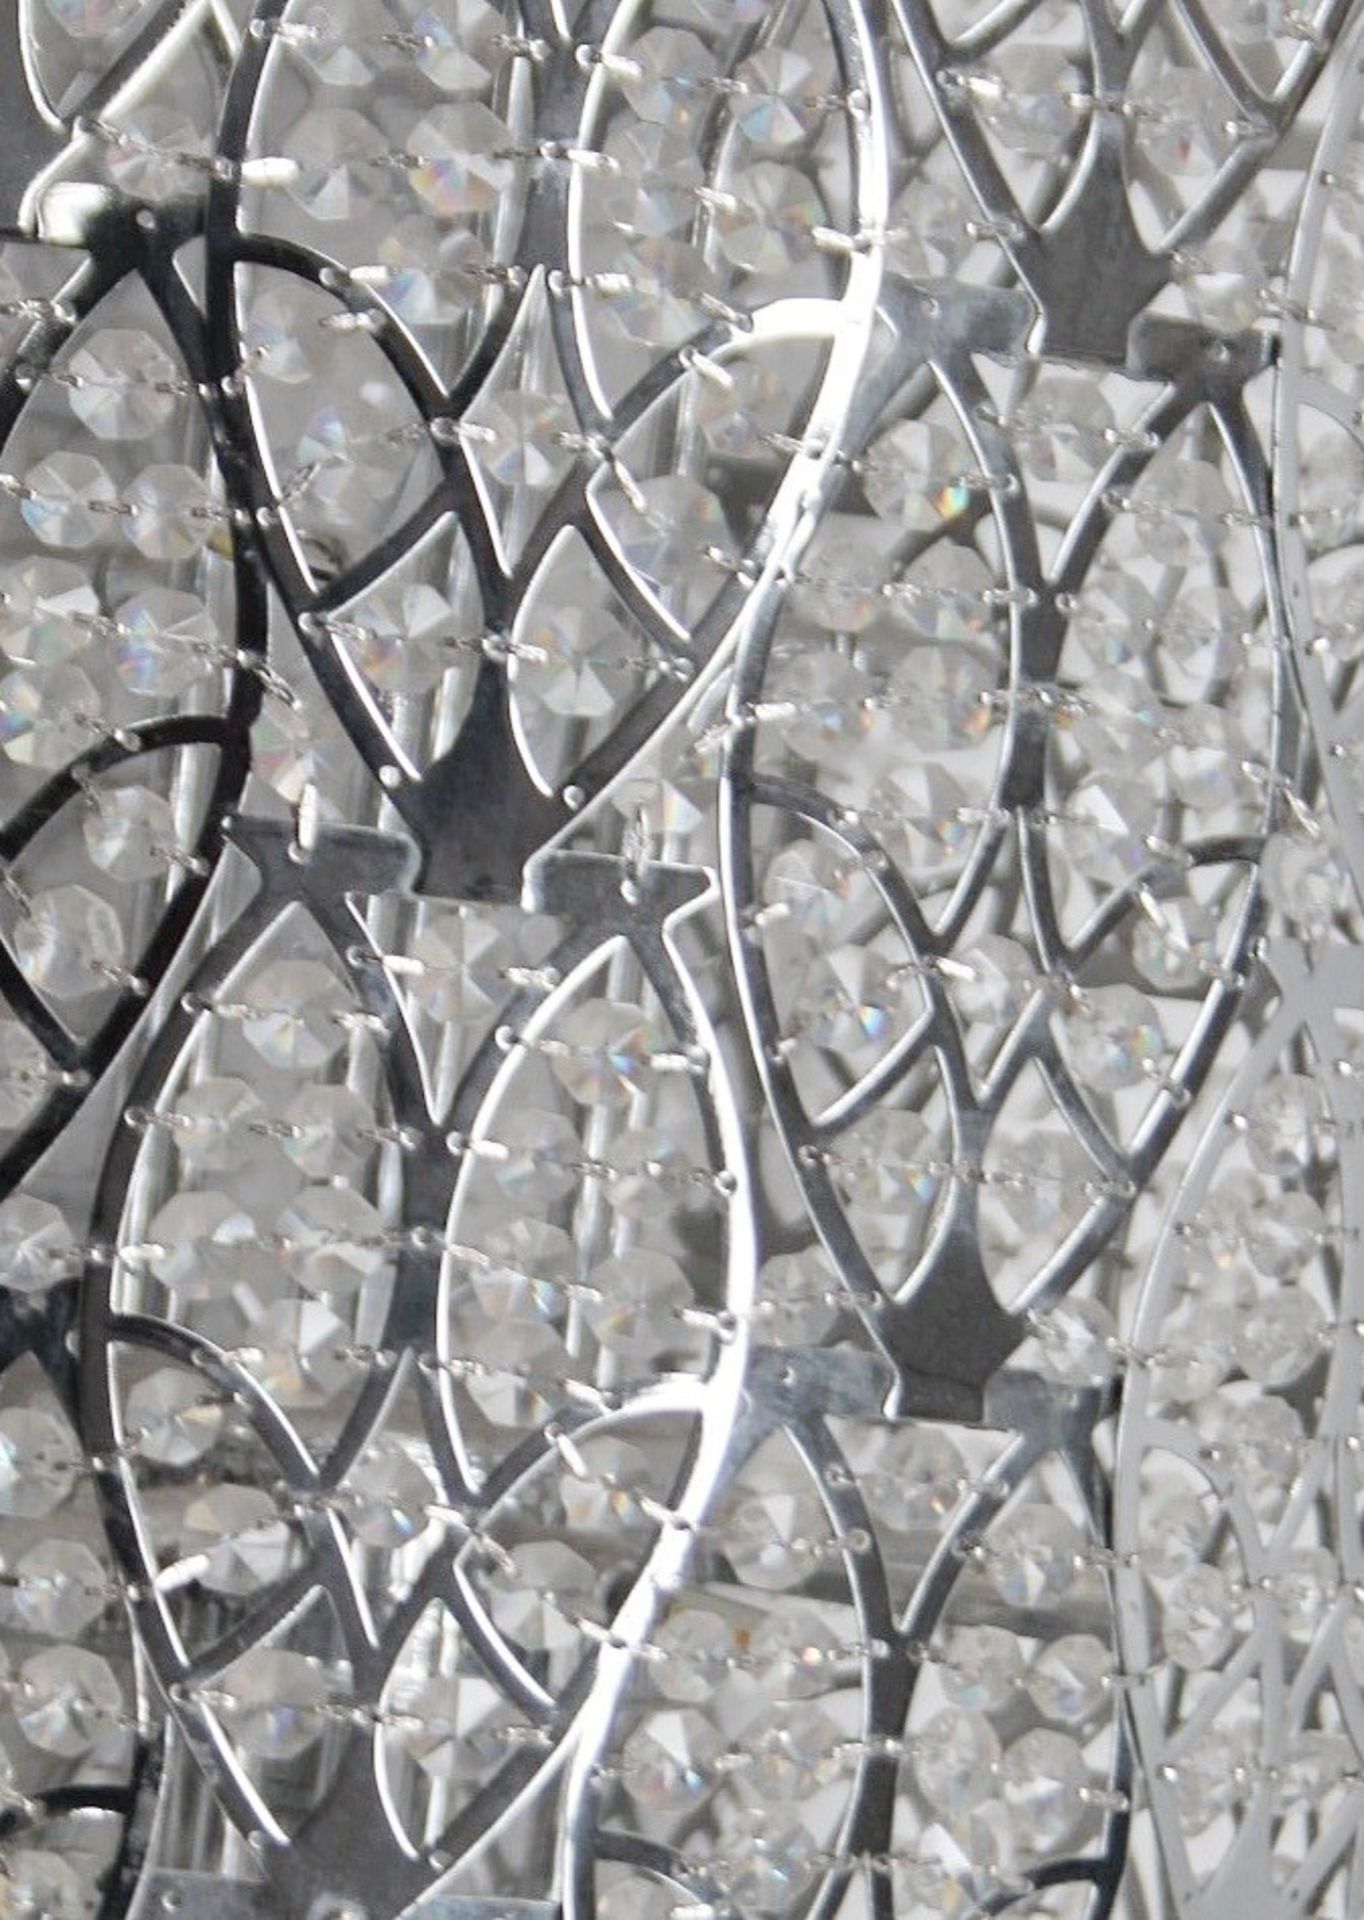 1 x High-end Italian LED Light Fitting Encrusted In Premium ASFOUR Crystal Elements - Approximate - Image 8 of 8